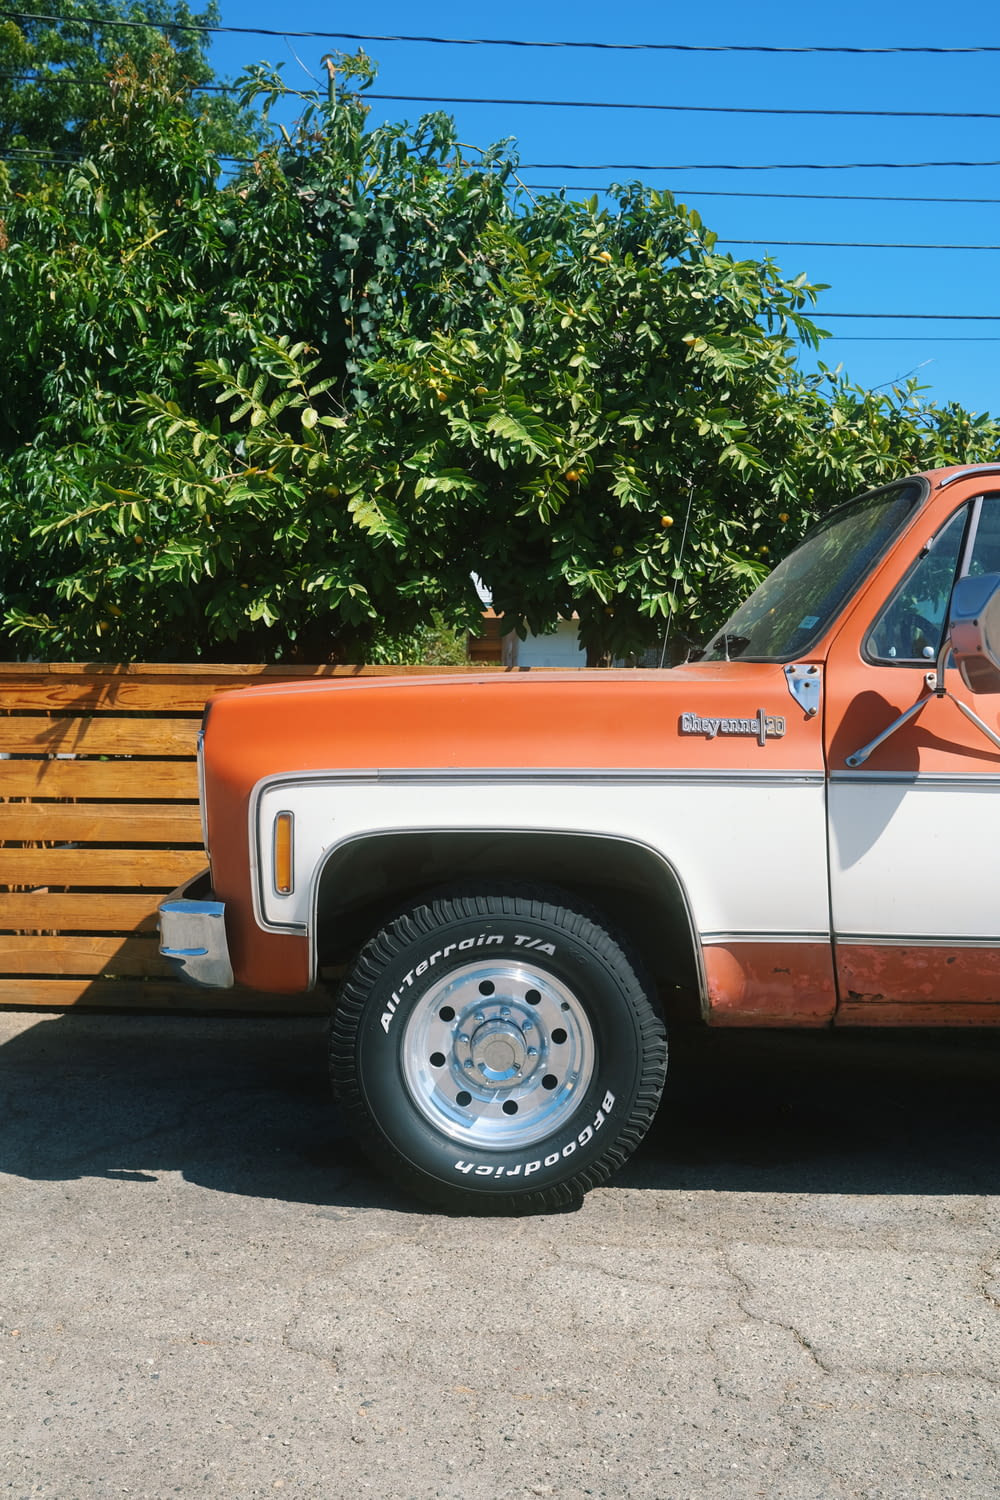 an orange and white truck parked next to a wooden fence